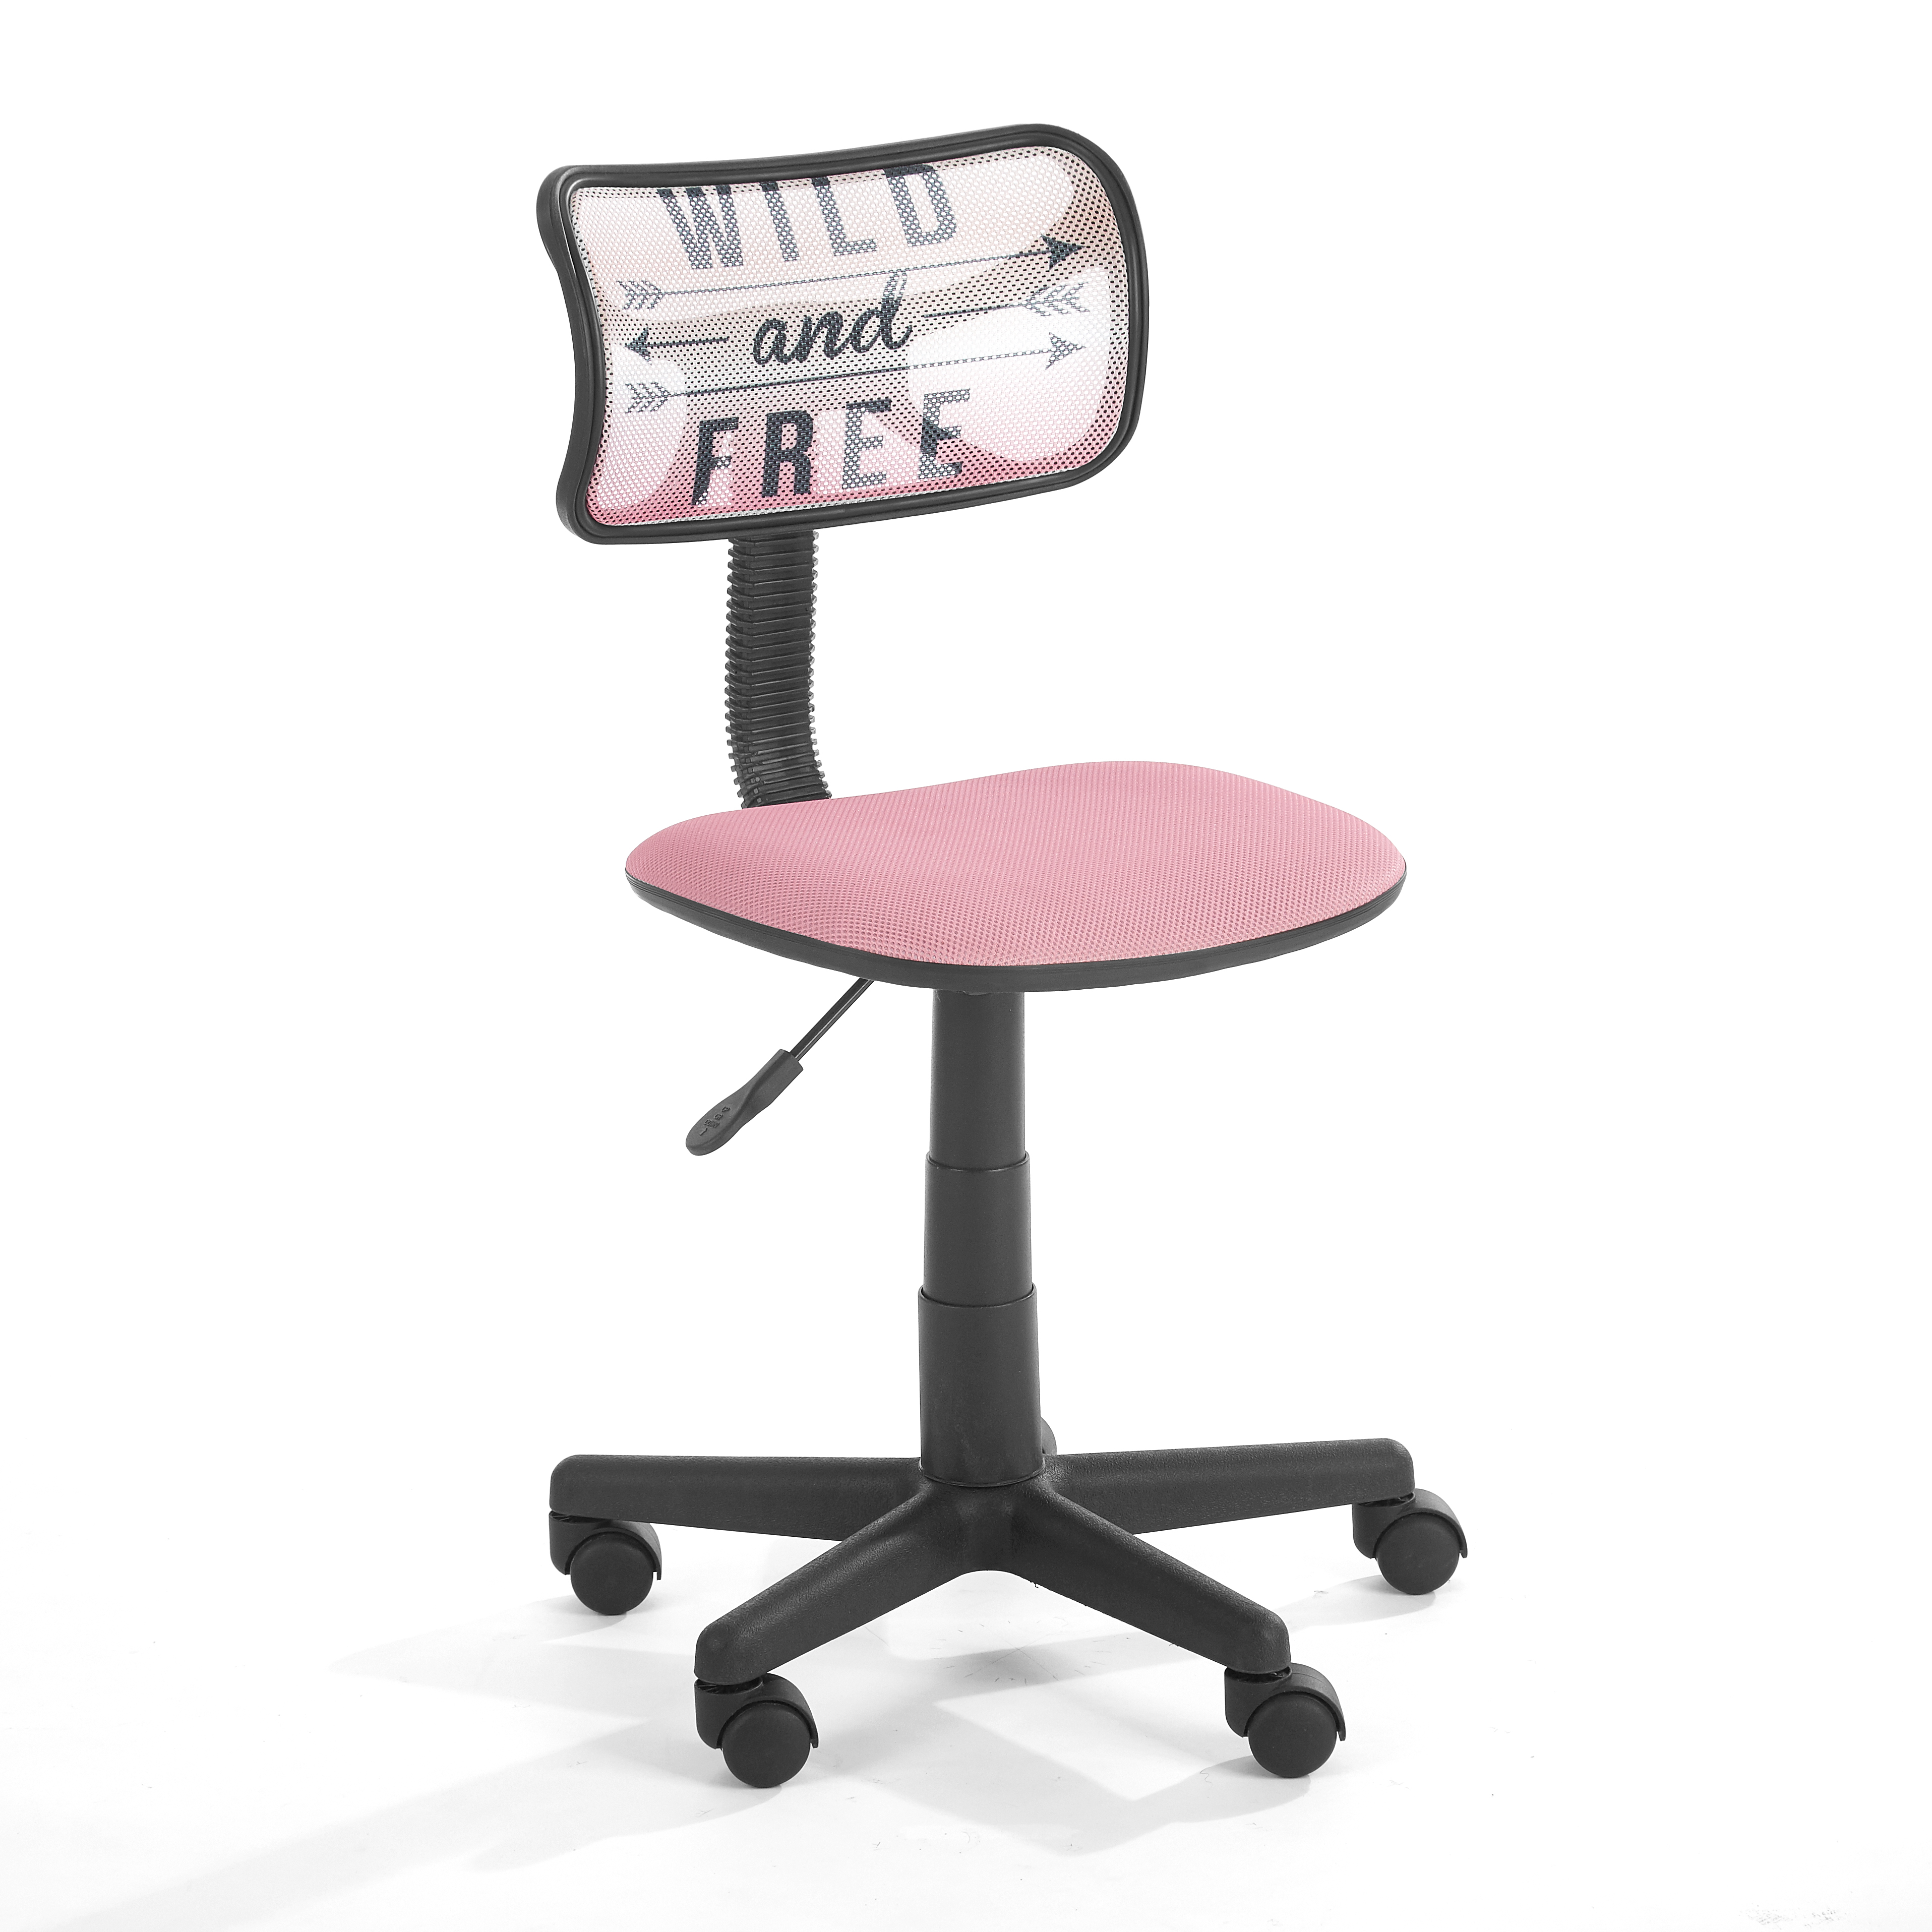 Urban Shop Task Chair with Adjustable Height & Swivel, 225 lb. Capacity, Multiple Colors - image 2 of 5